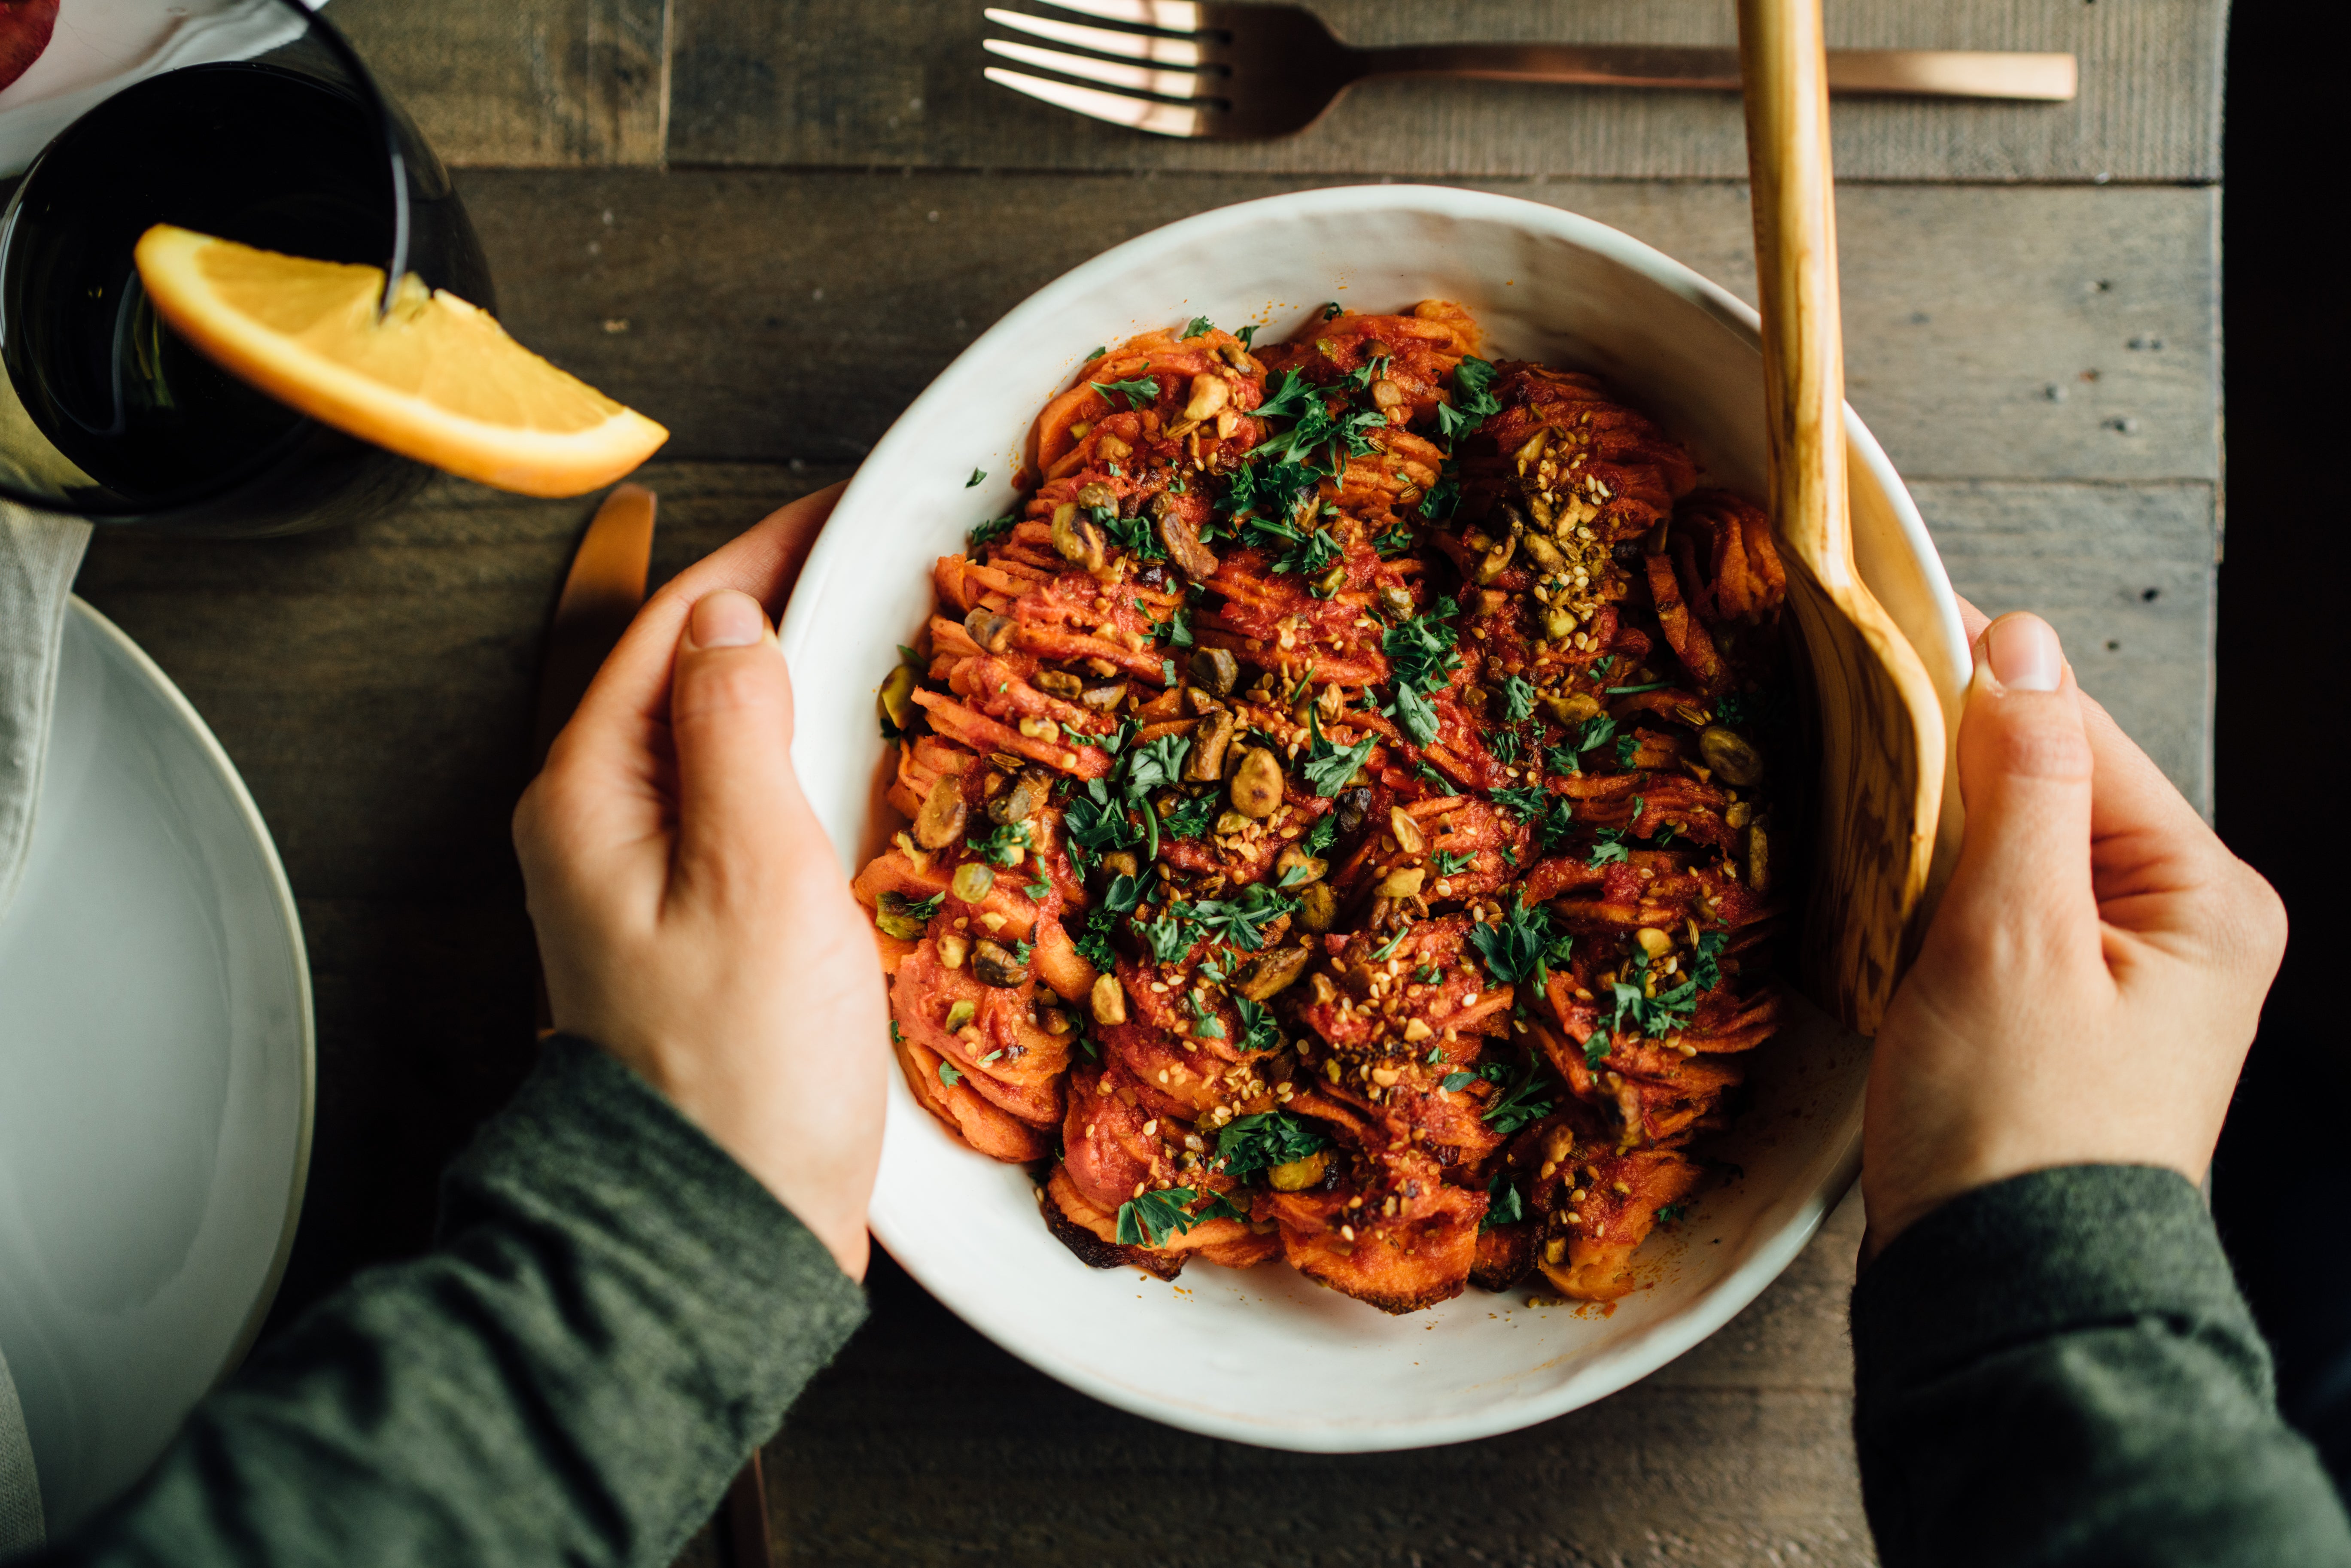 Bon Appétit's Shingled Harissa Sweet Potatoes With Mother's